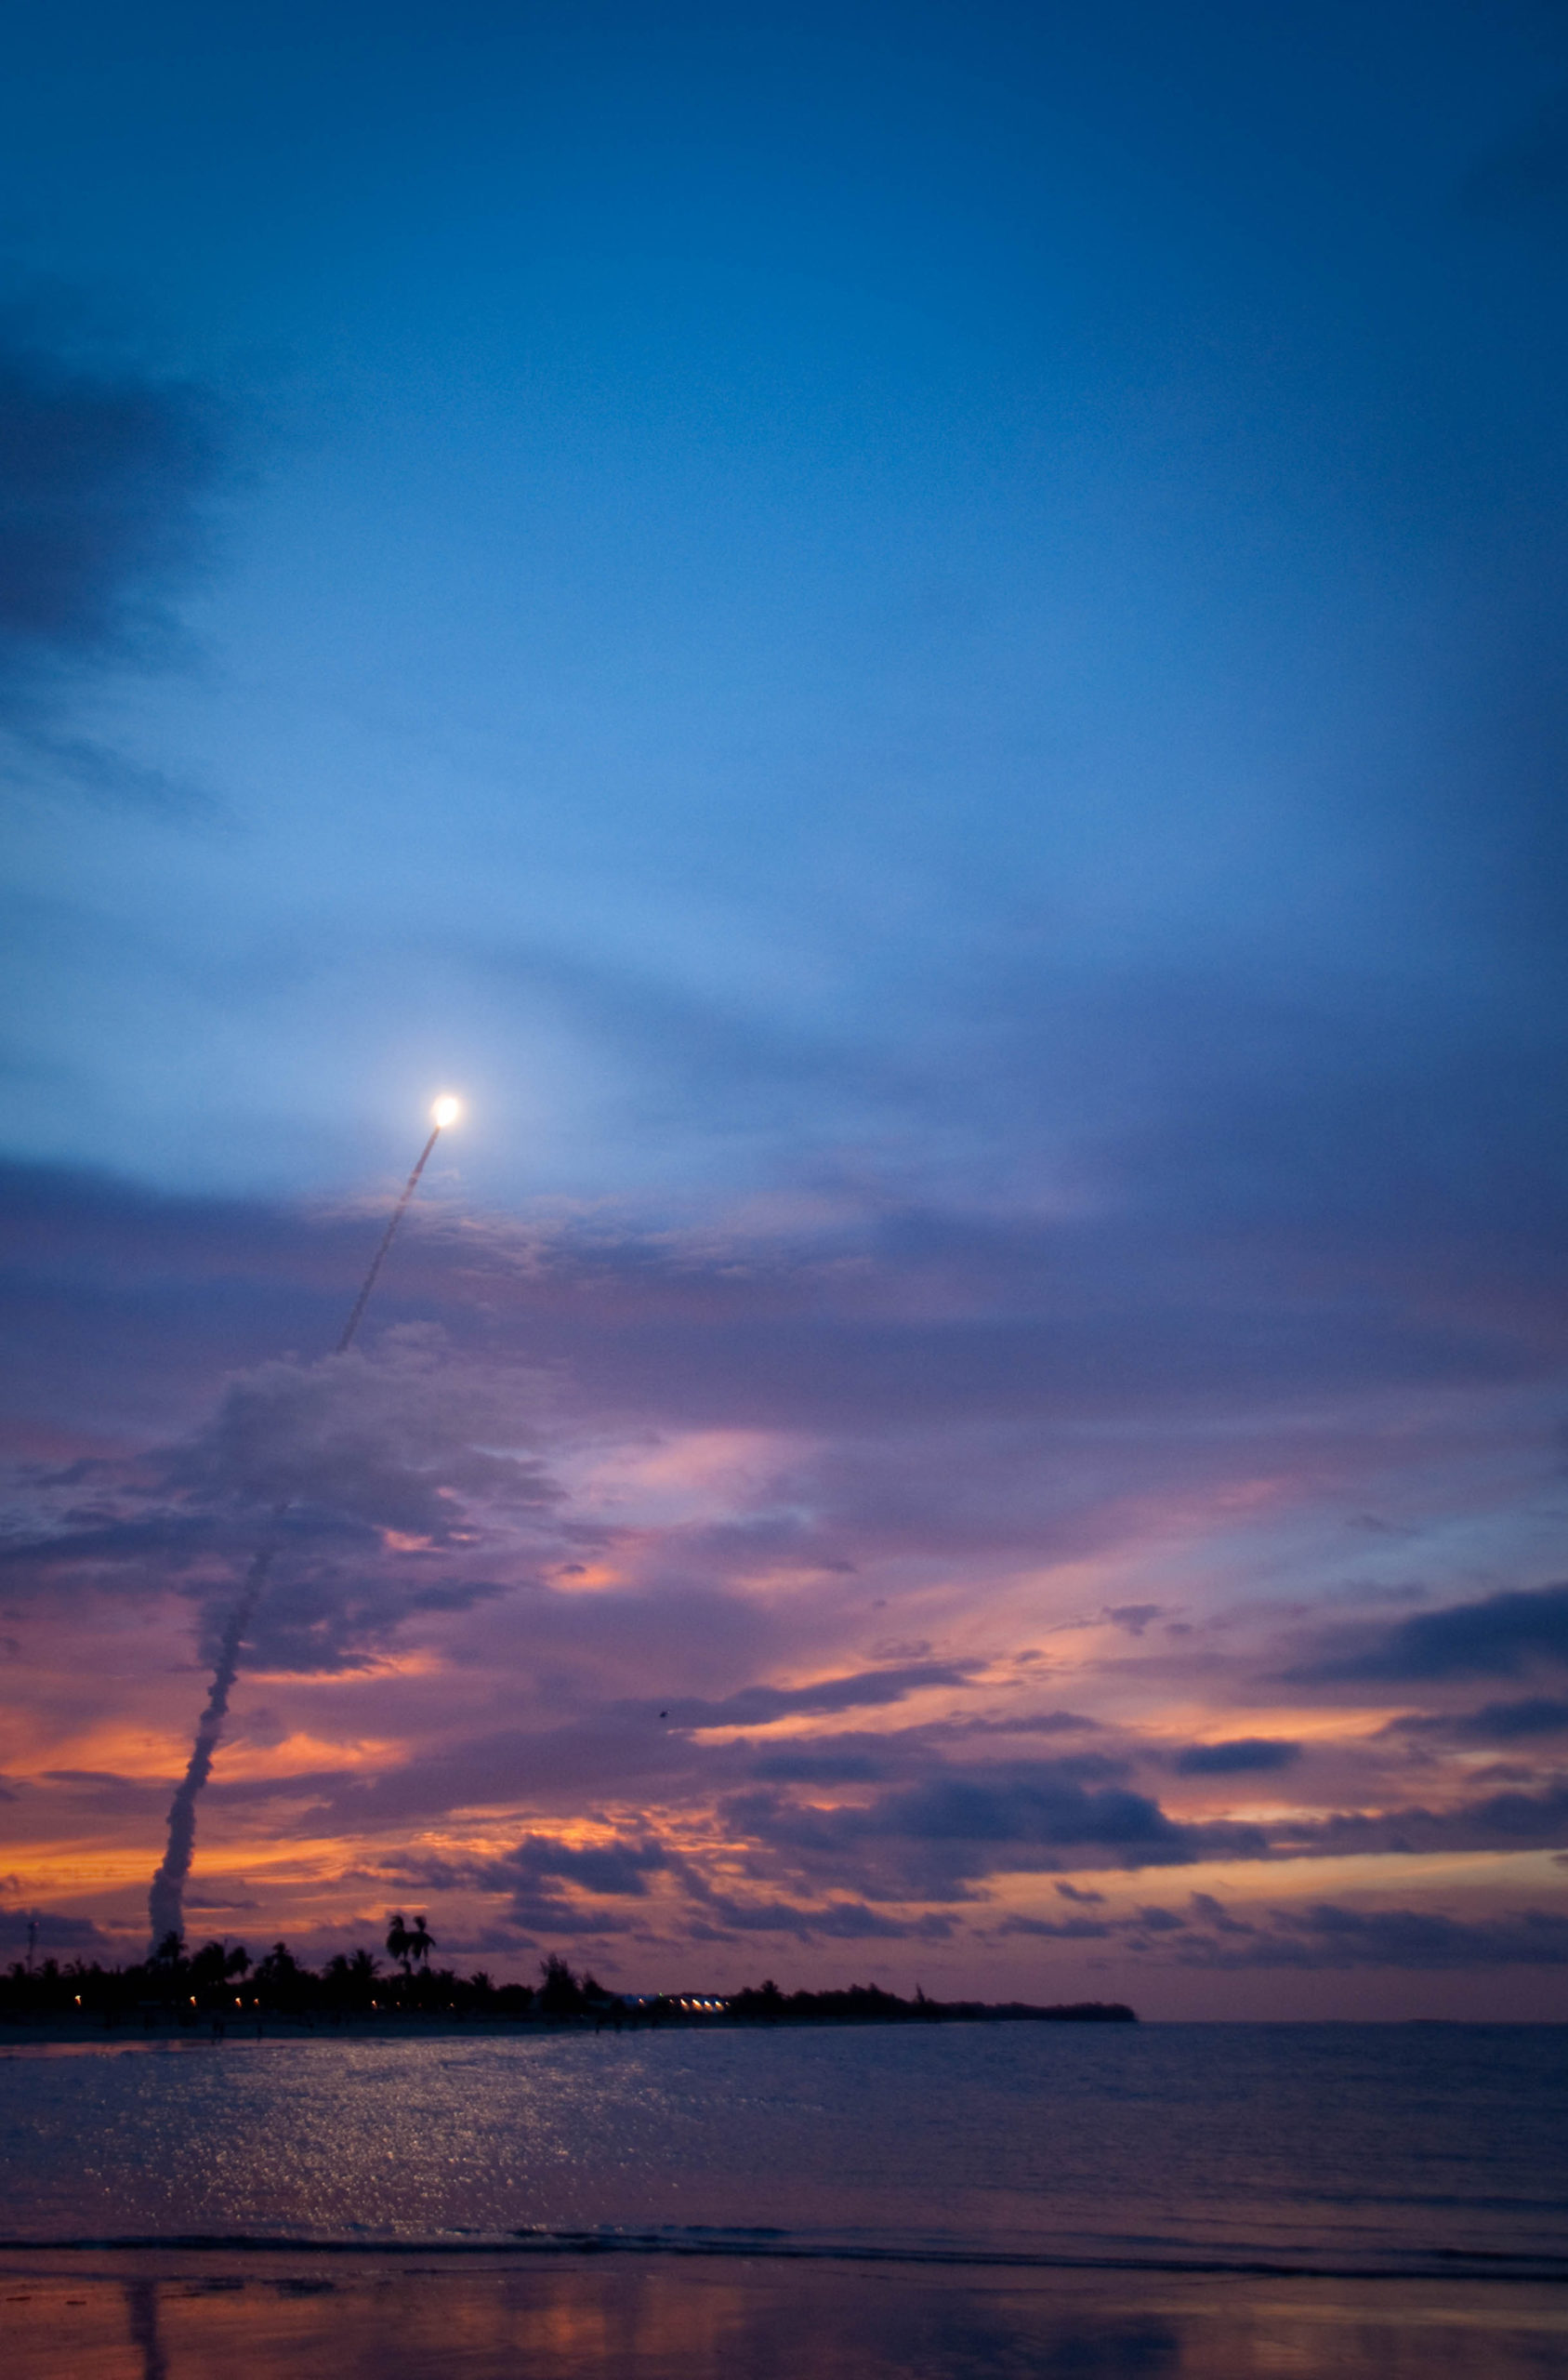 Takeoff of the Ariane rocket from its launch pad at the Guyanese space center in Kourou.
The rocket carries satellites. 06 june 13 - Kourou - French guiana